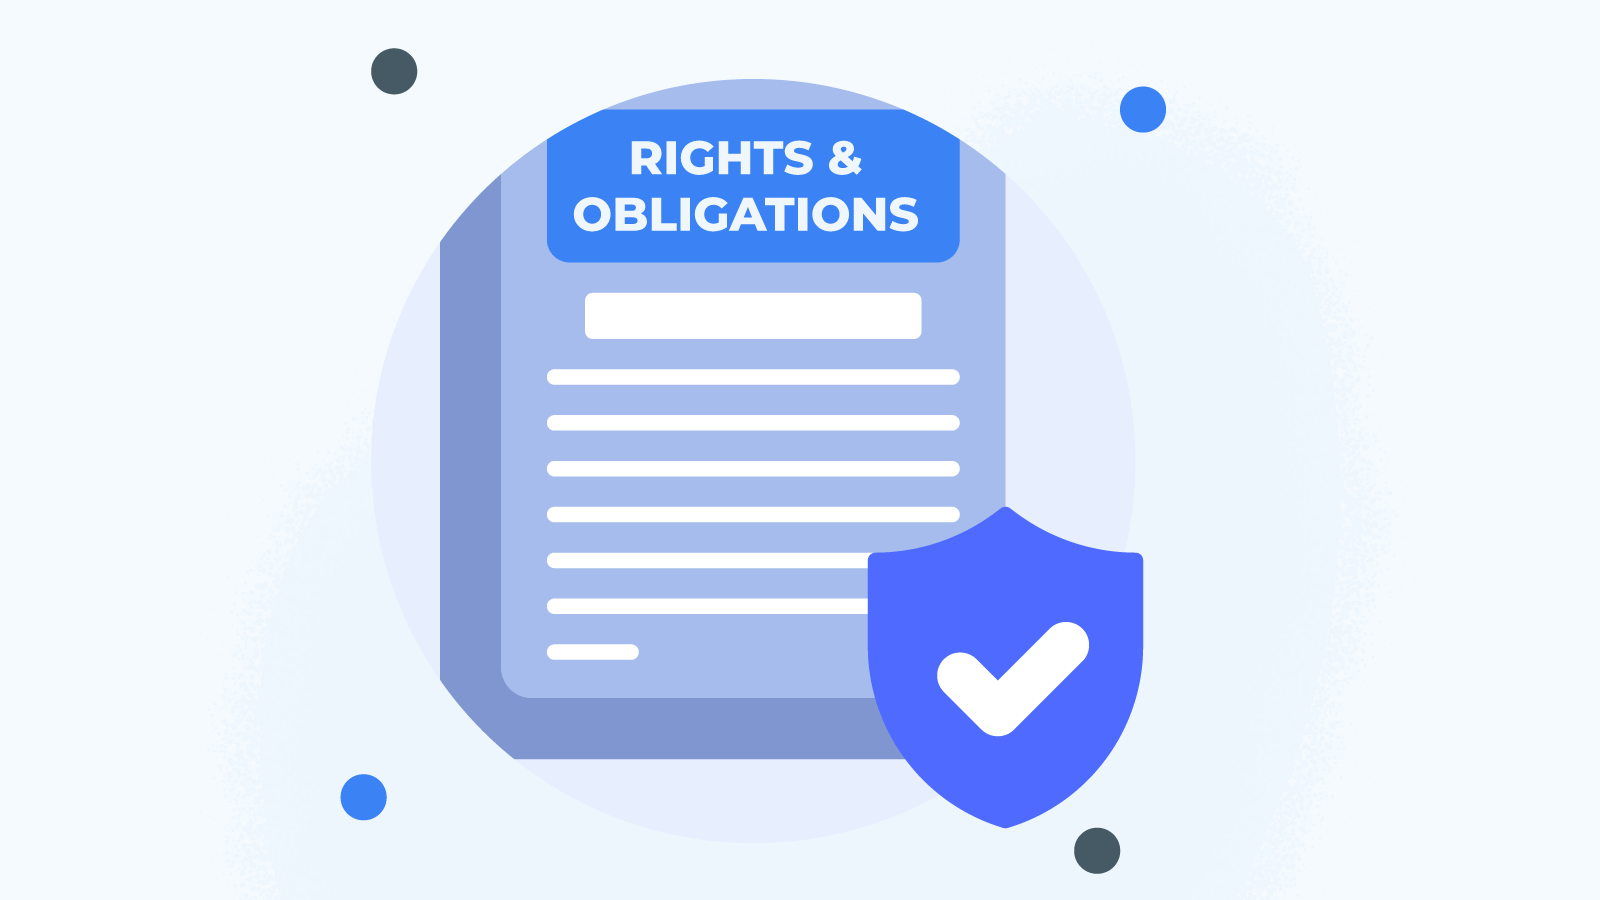 Your rights & obligations